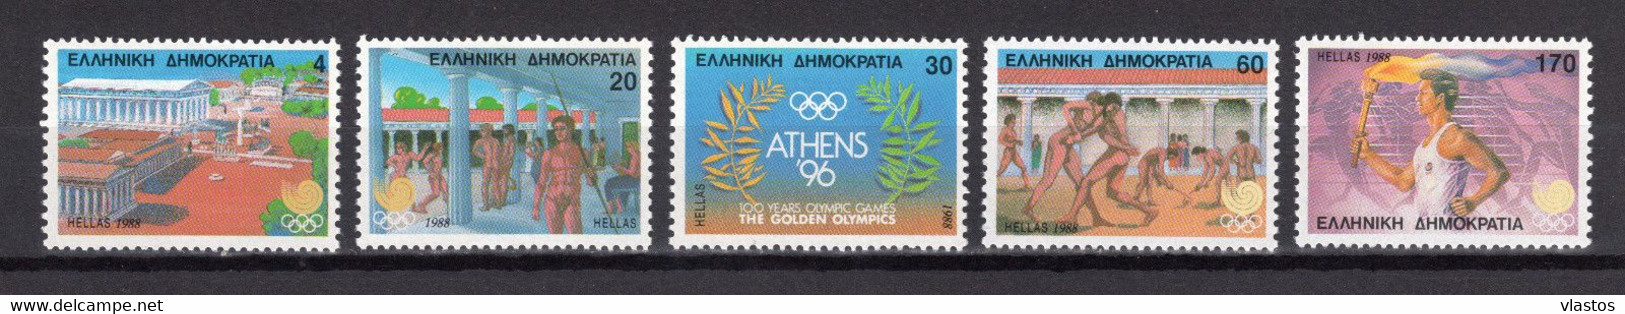 GREECE 1988 COMPLETE YEAR - PERFORATED STAMPS MNH - Années Complètes